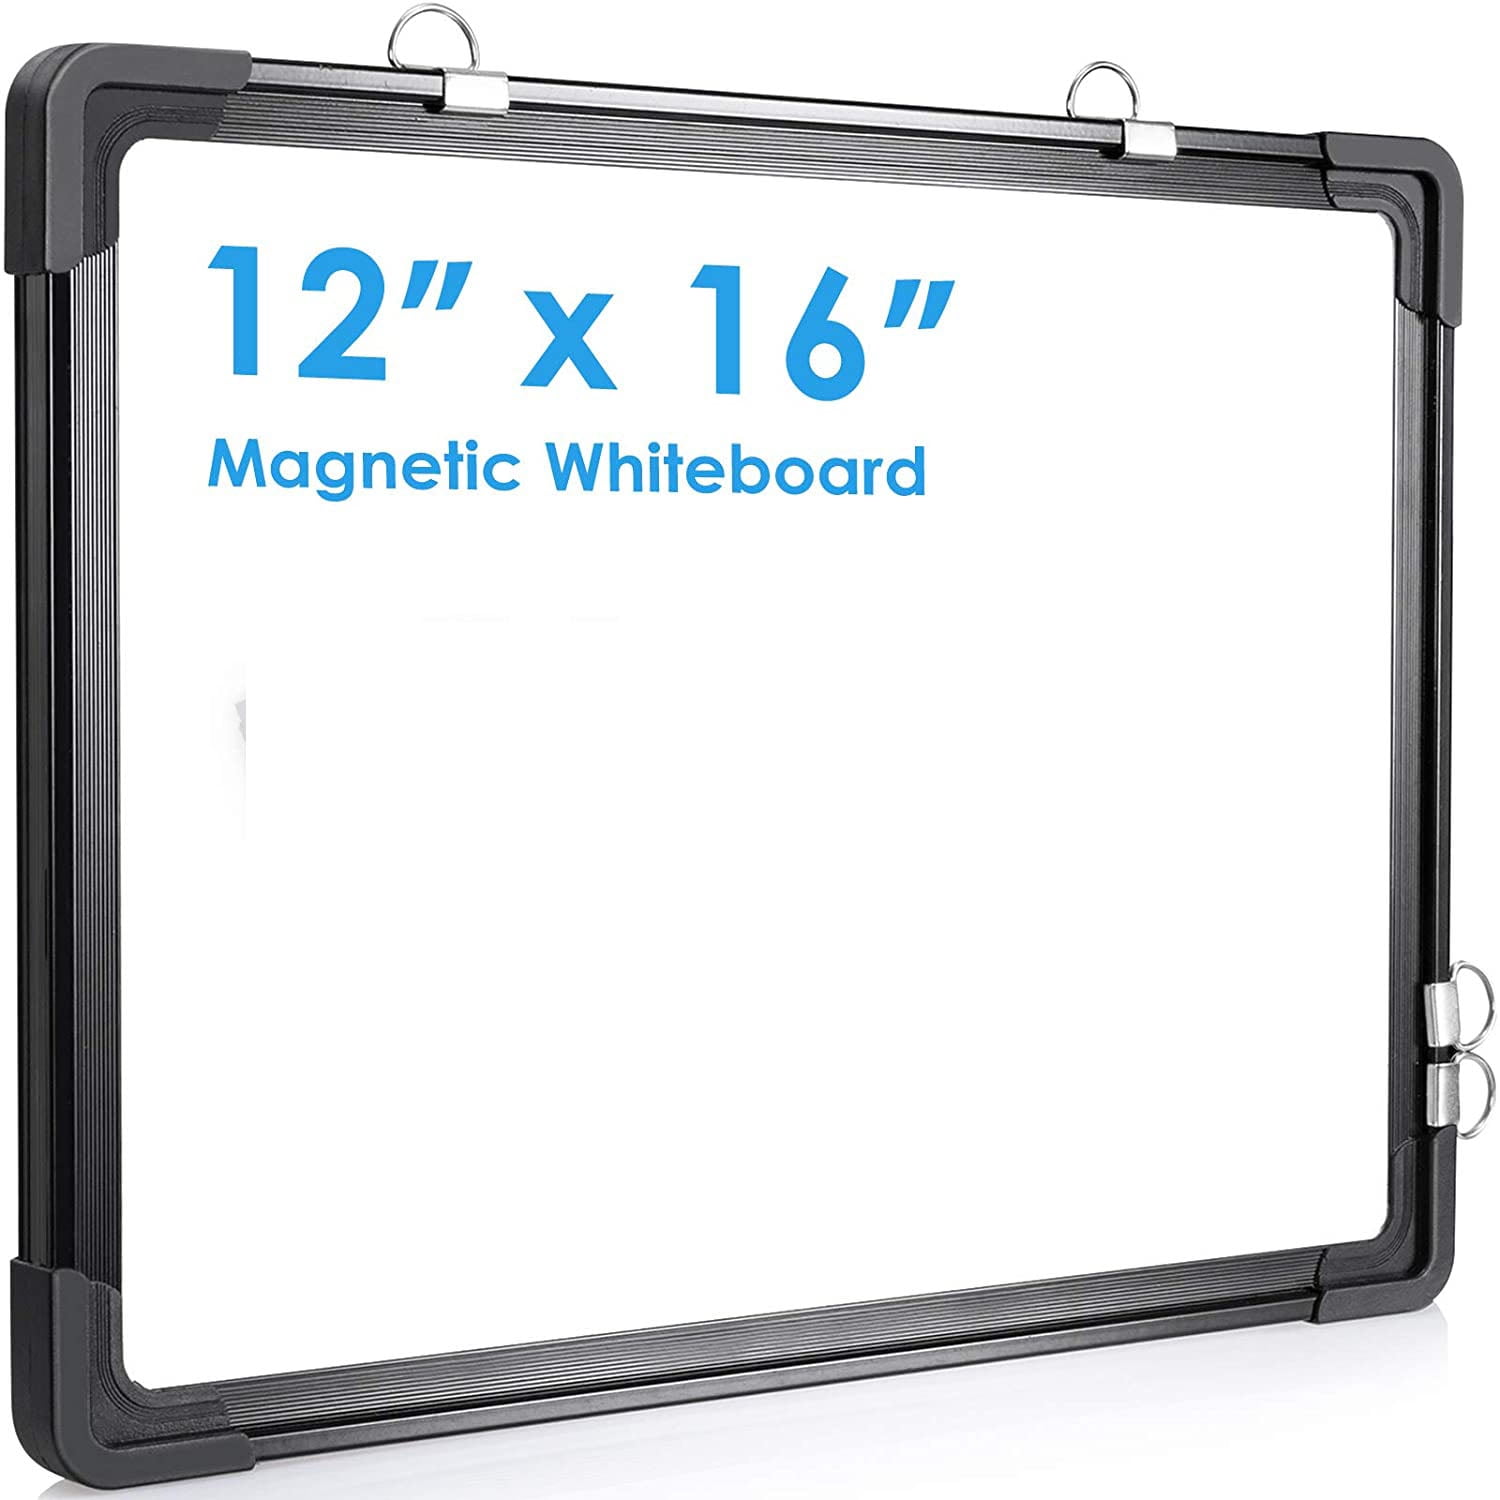 Portable Double-Sided Small Whiteboard for School 16 x 12 Inch Wall Mounted White Board Magnetic Dry Erase Board Home & Office 